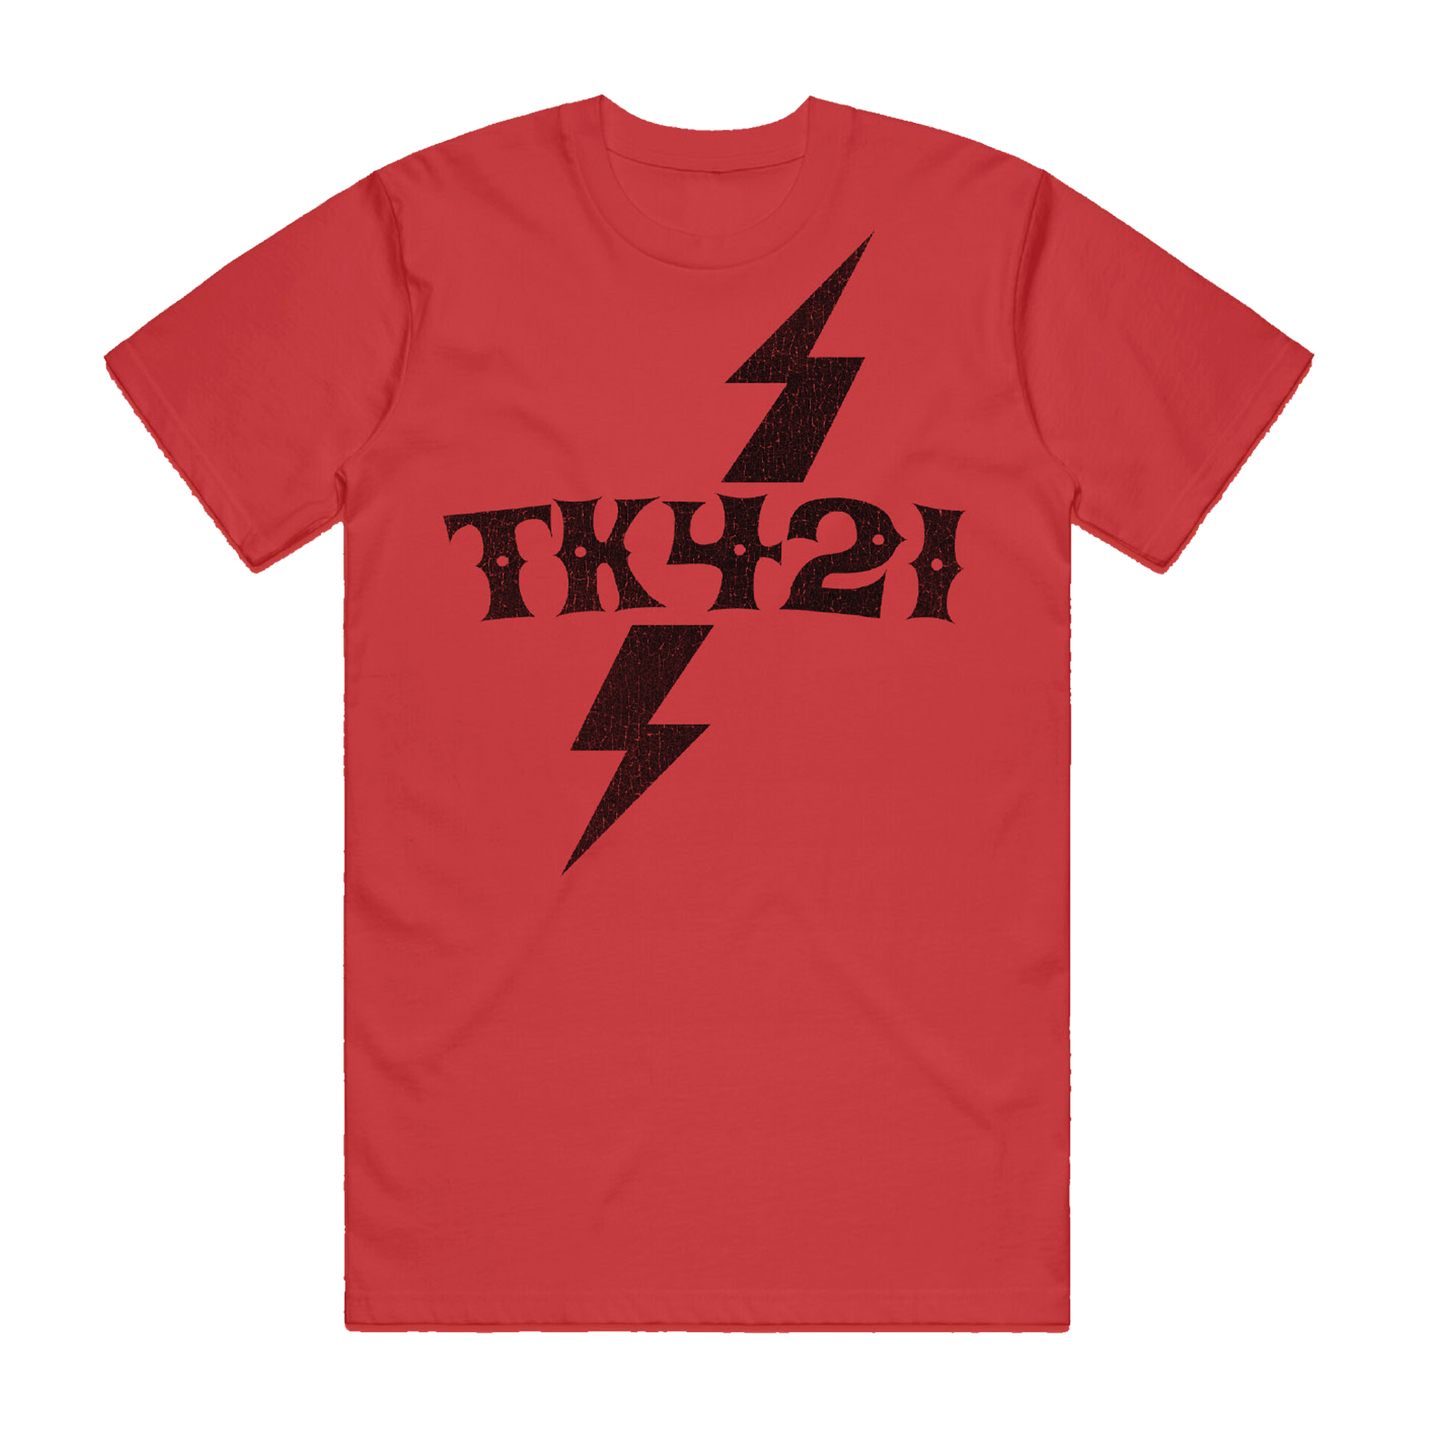 TK421 Bolt Red Tee